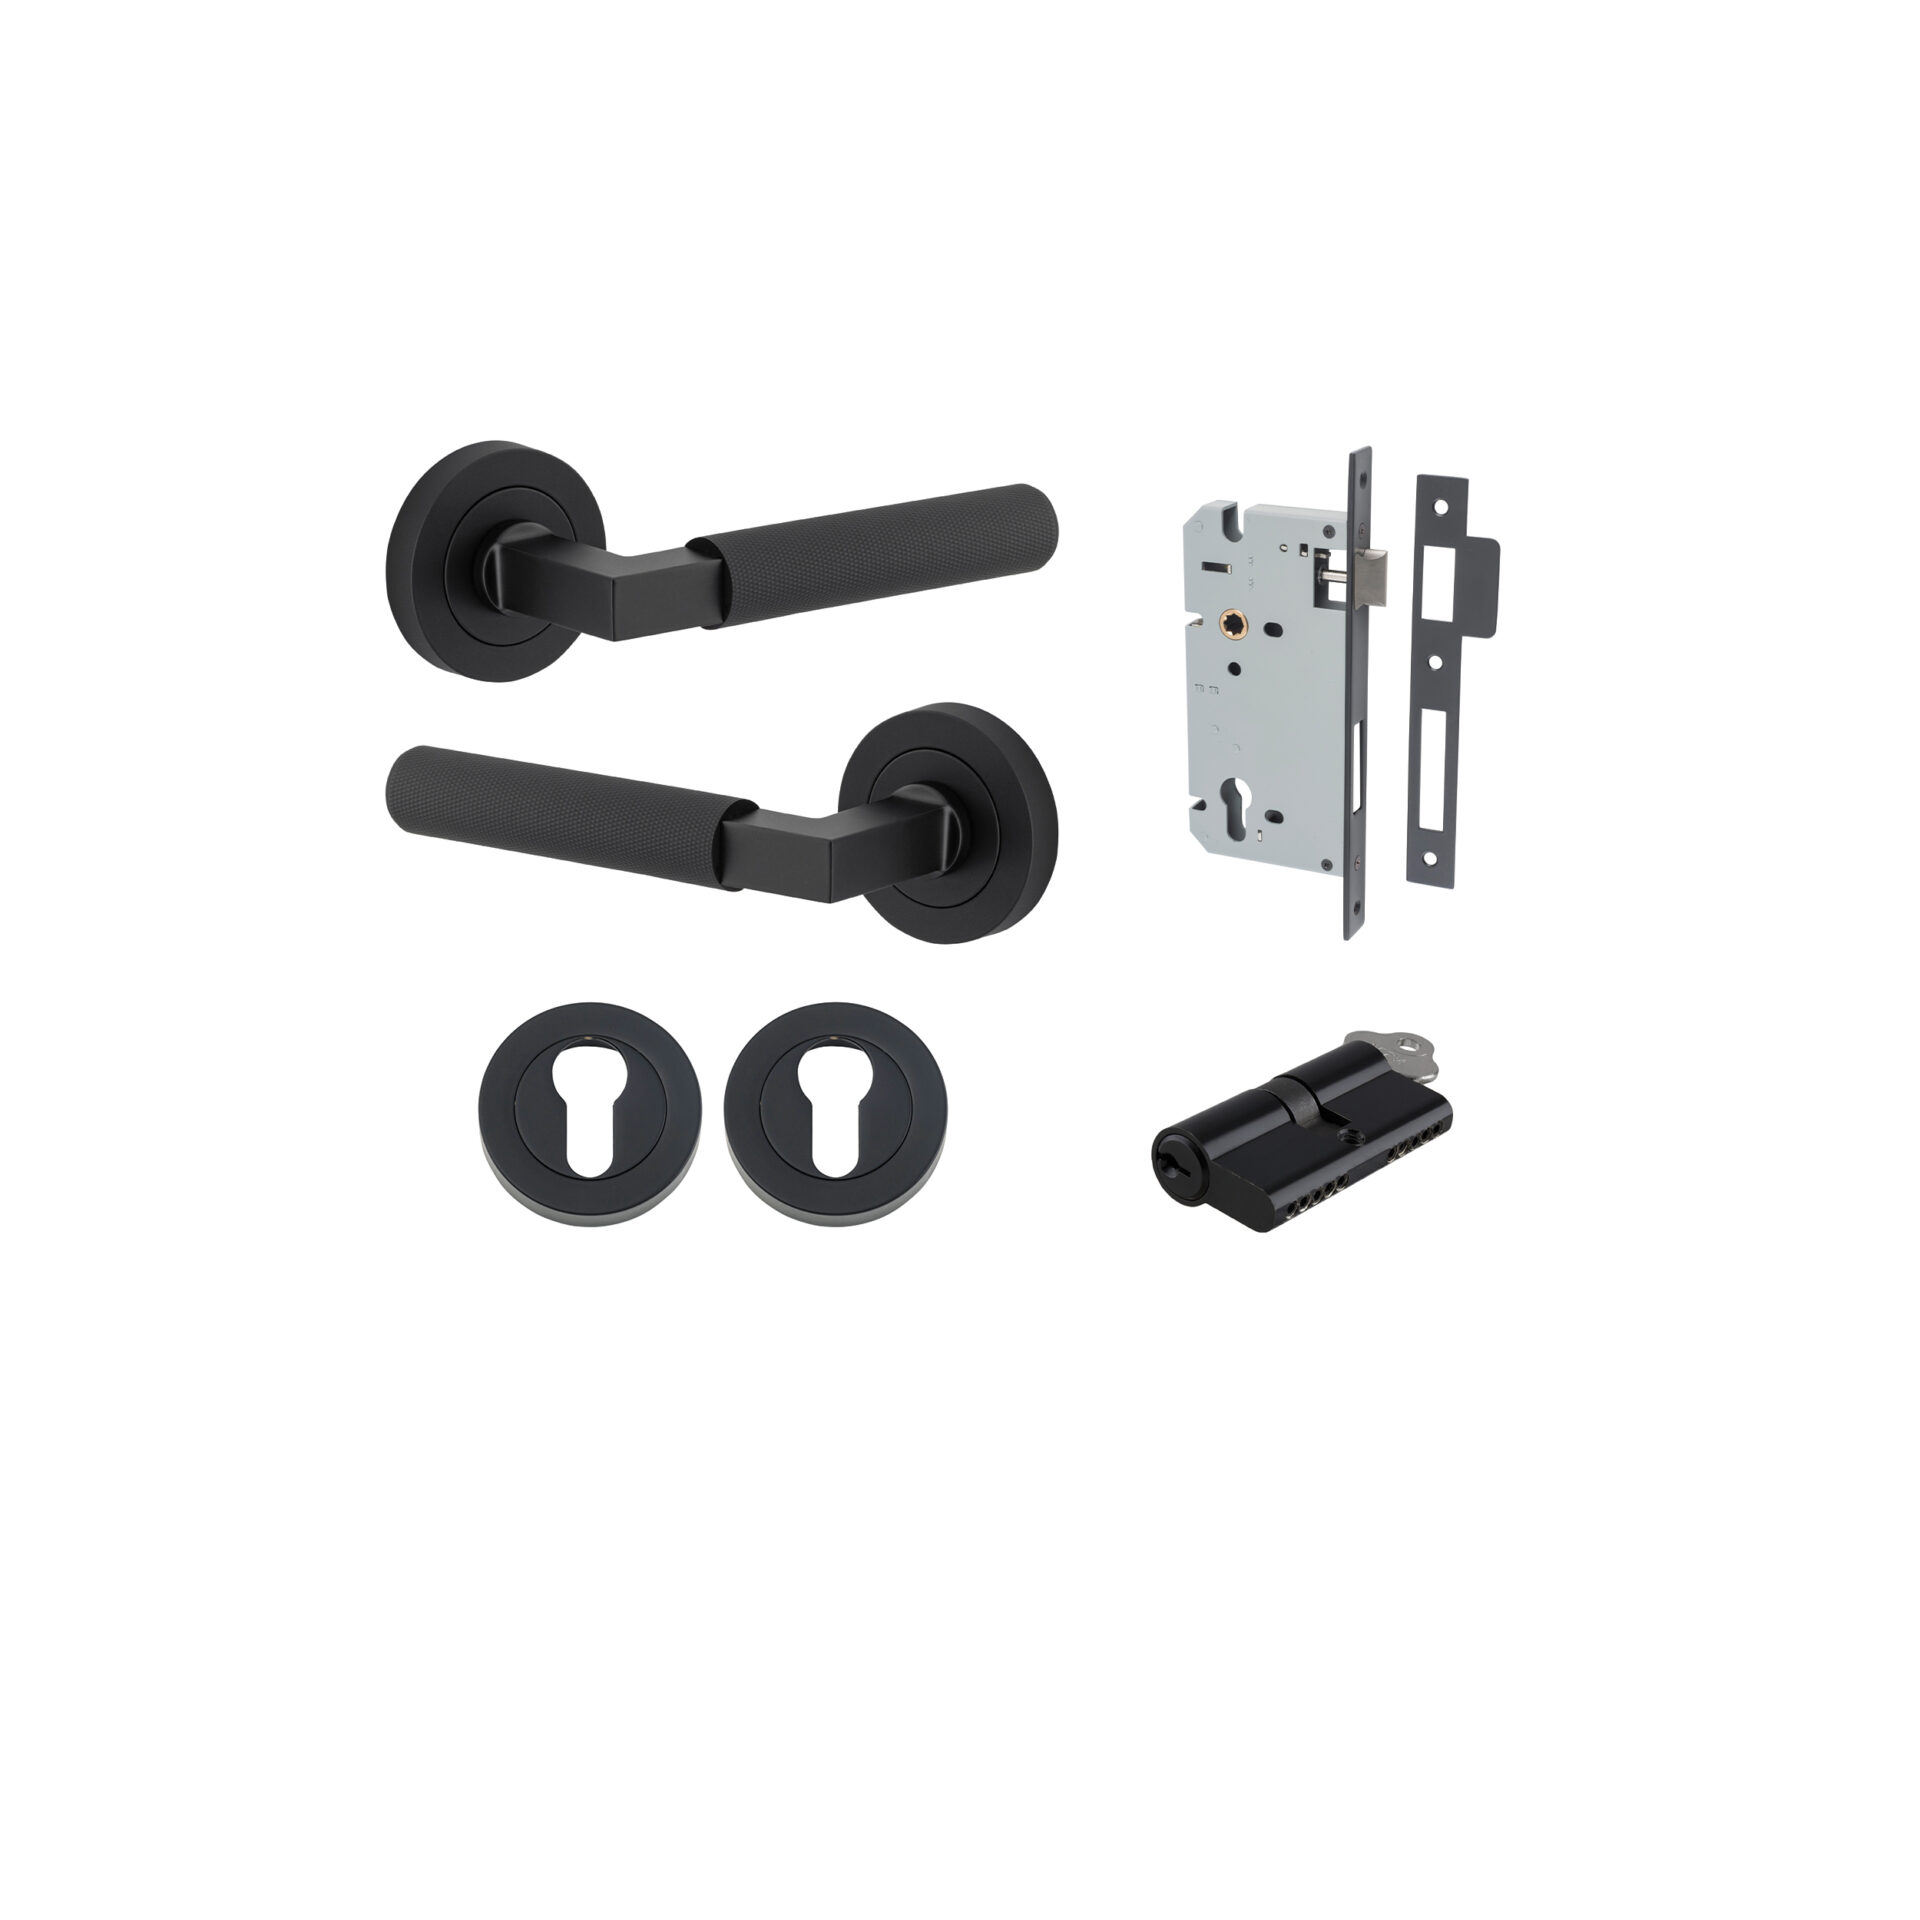 Brunswick Lever - Round Rose Entrance Kit with High Security Lock